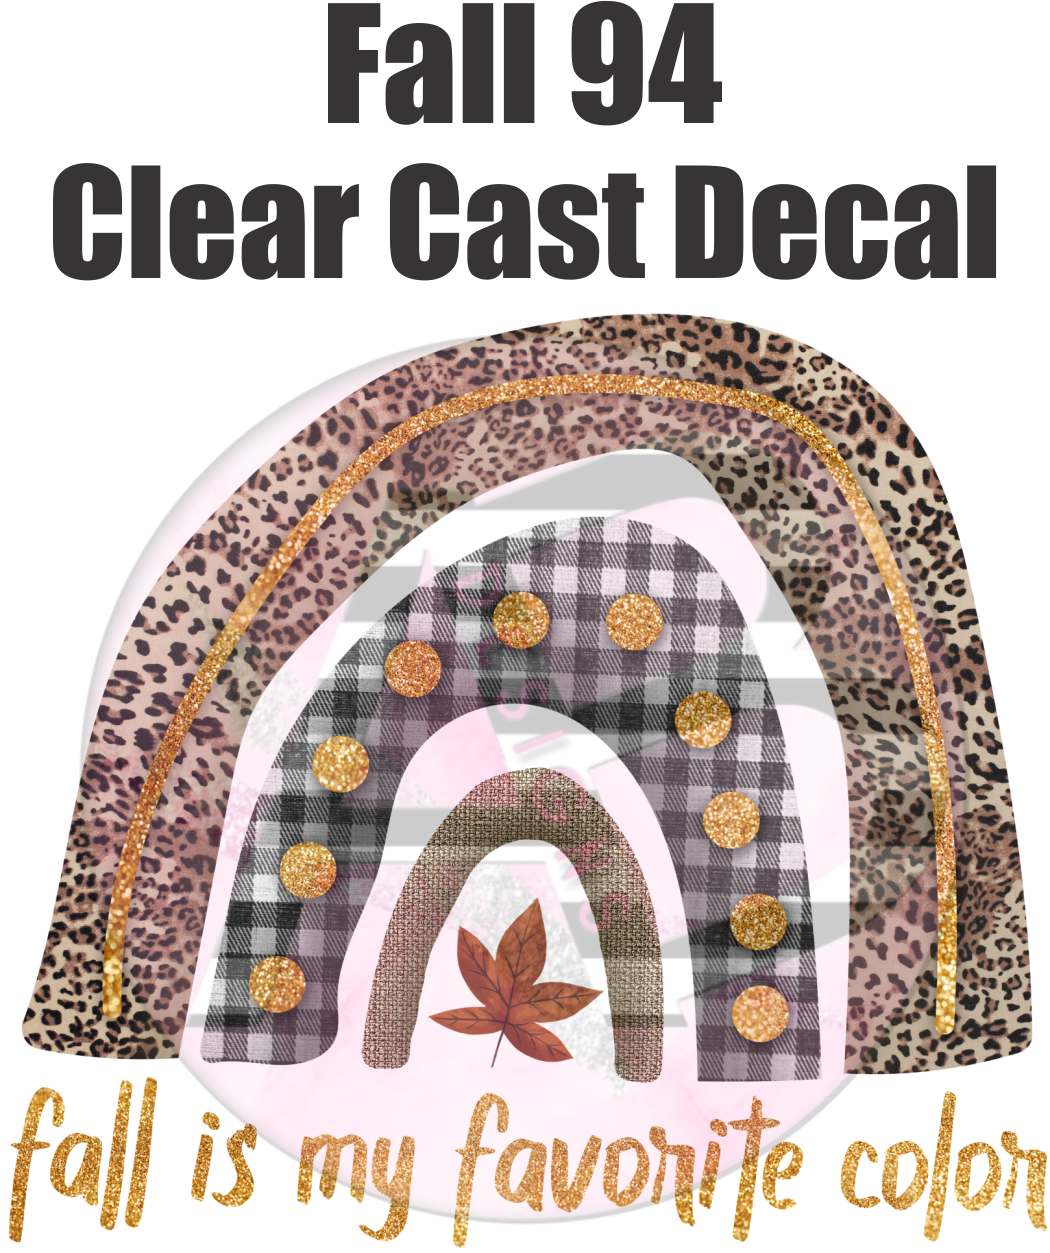 Fall 94 - Clear Cast Decal